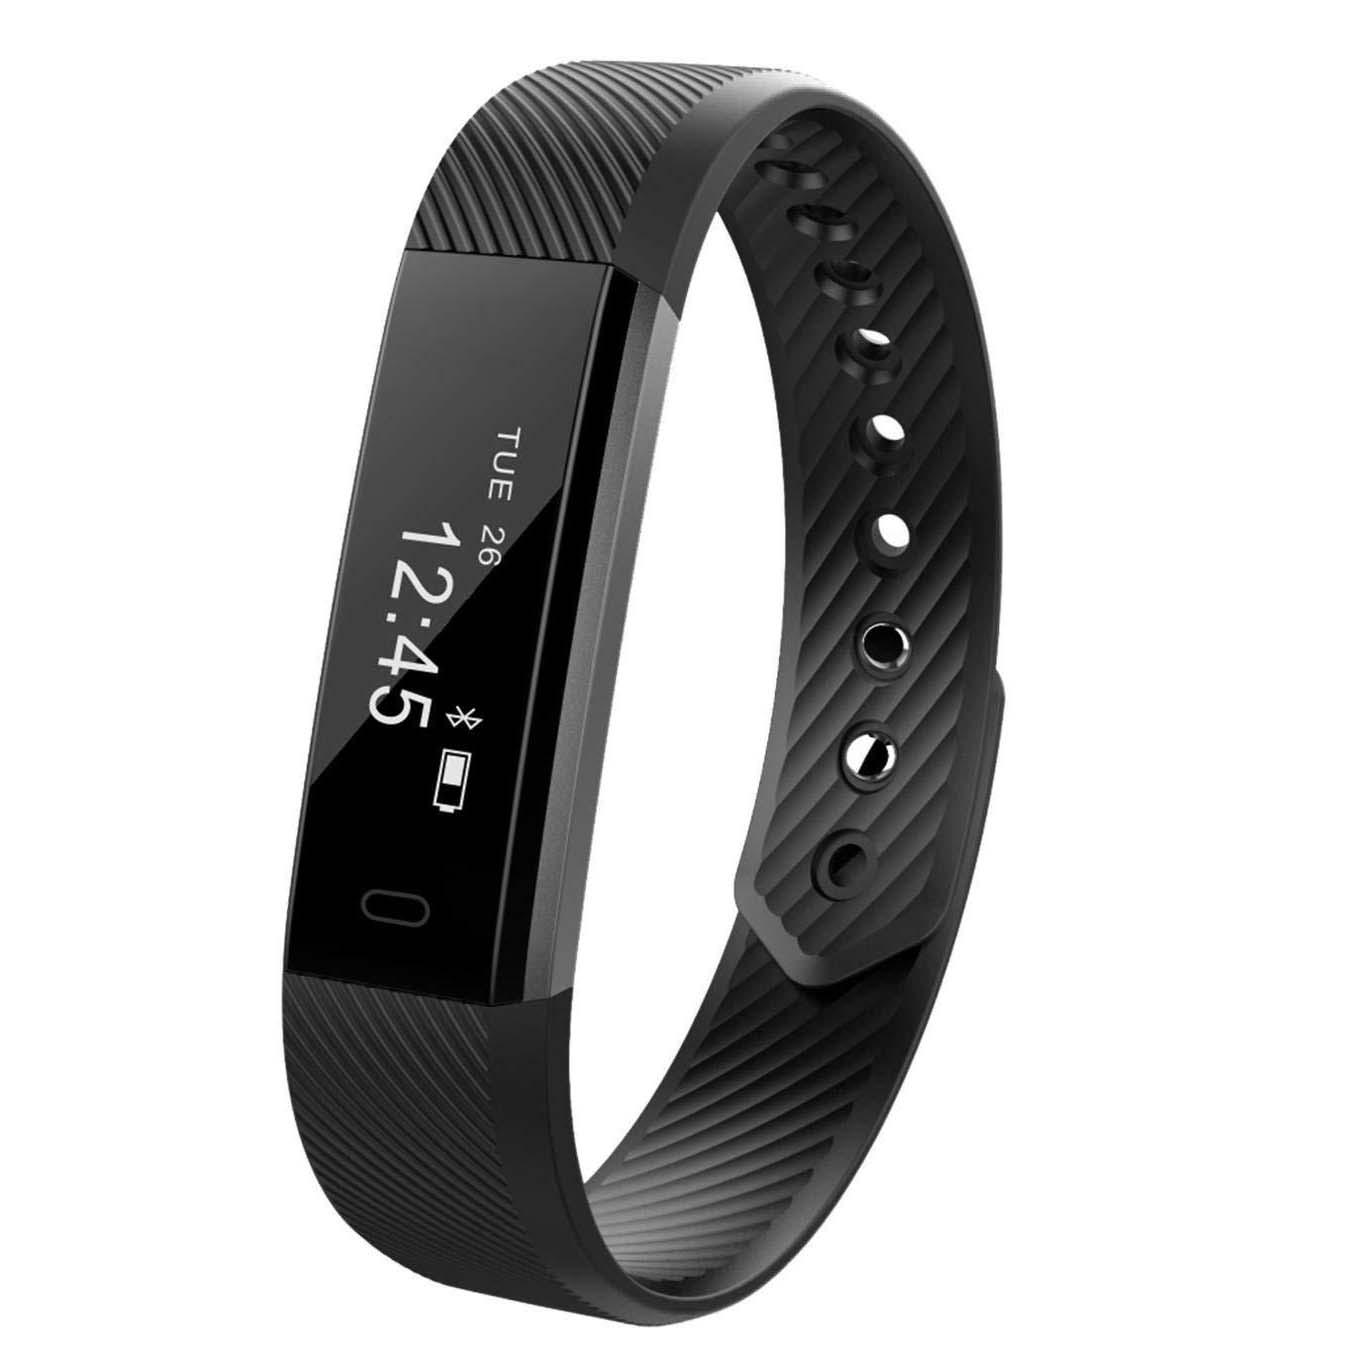 Stybits ID115 SMART BAND WITH OLED DISPLAY Smartwatch Price in India - Buy  Stybits ID115 SMART BAND WITH OLED DISPLAY Smartwatch online at Flipkart.com